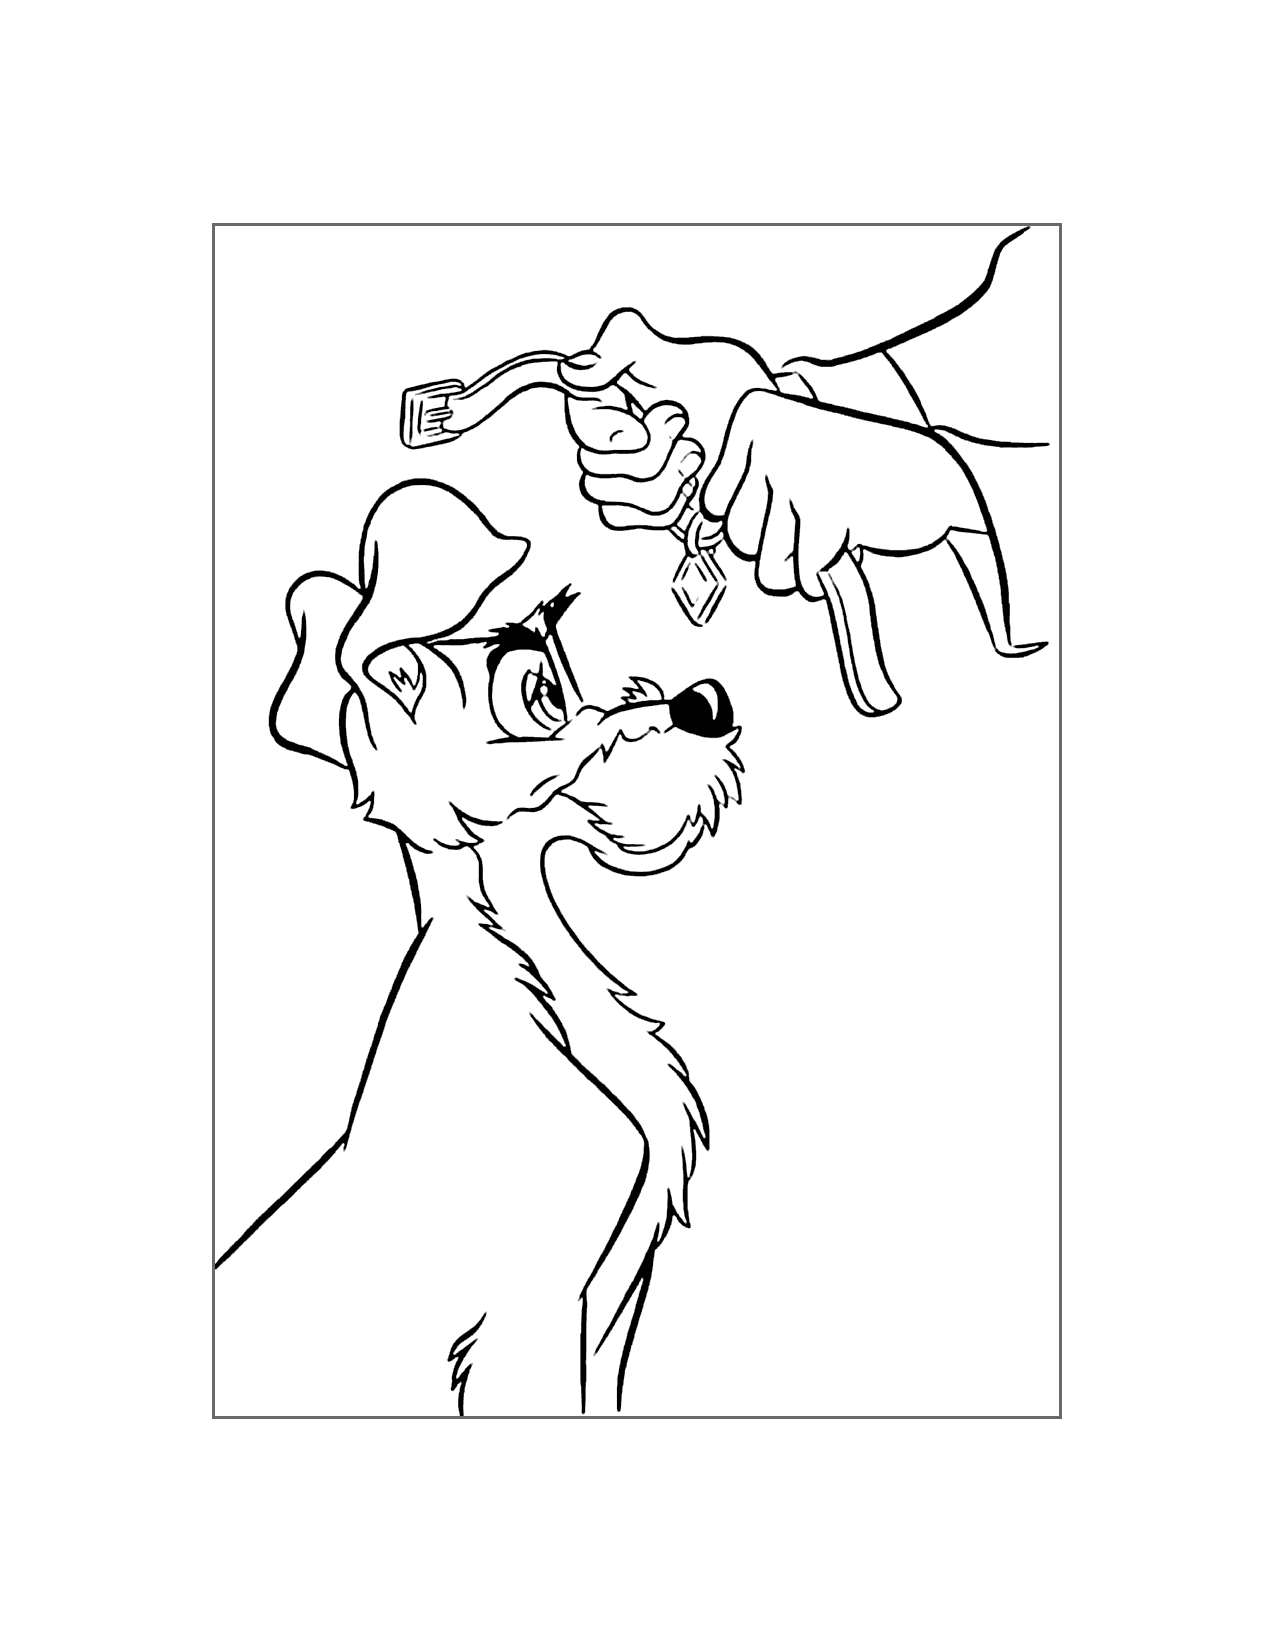 Tramp Gets A Collar Coloring Page